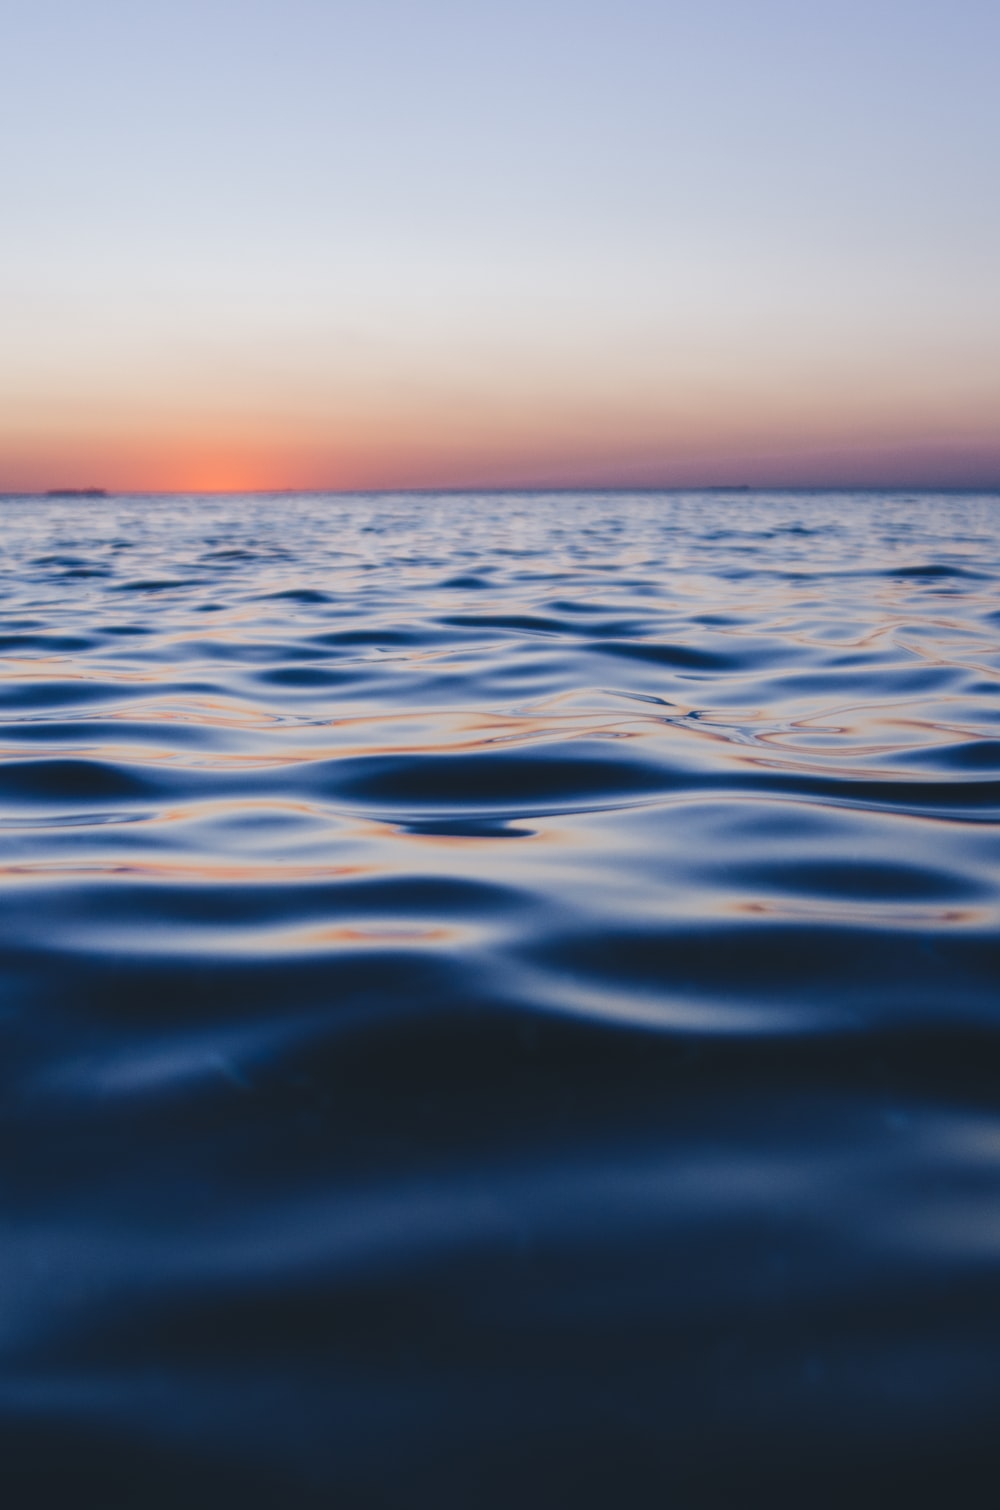 Peaceful Sea Picture. Download Free Image